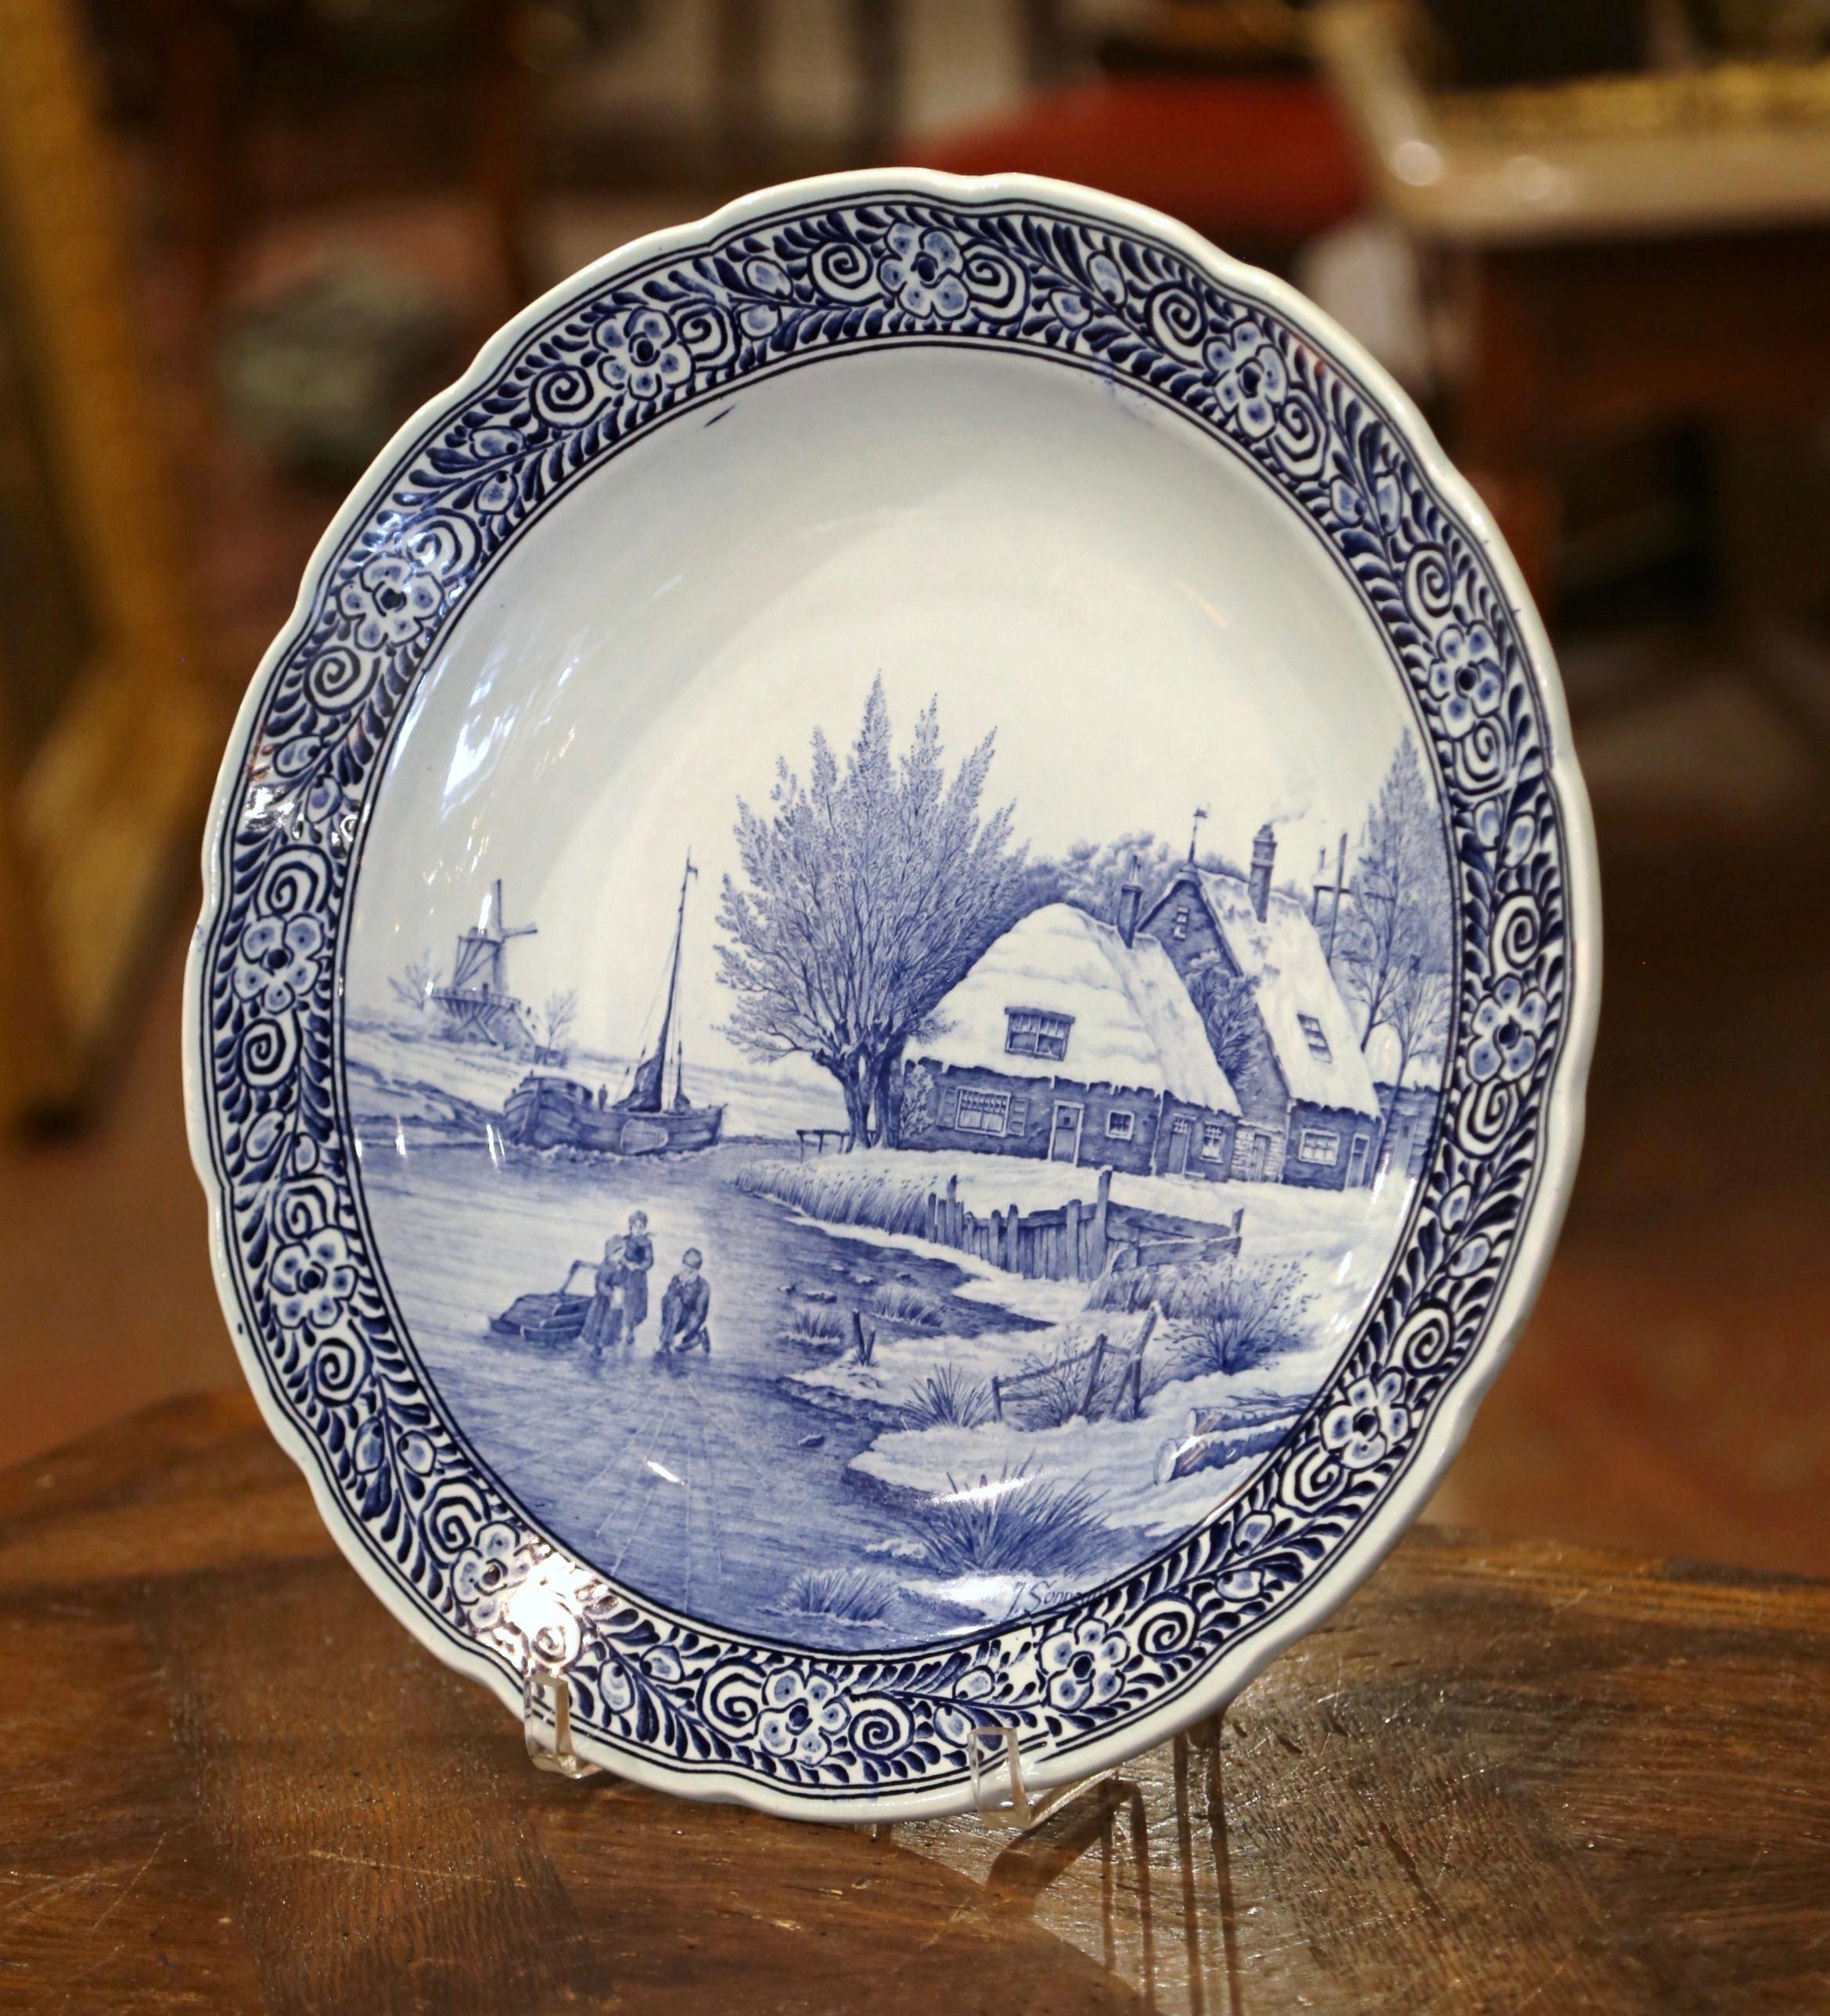 This large antique charger was crafted in Holland, circa 1960. The large, wall hanging plate depicts a wintry cottage scene, a Dutch windmill and boat, as well as people enjoying the frozen lake! One person is assembling skate shoes, while the other